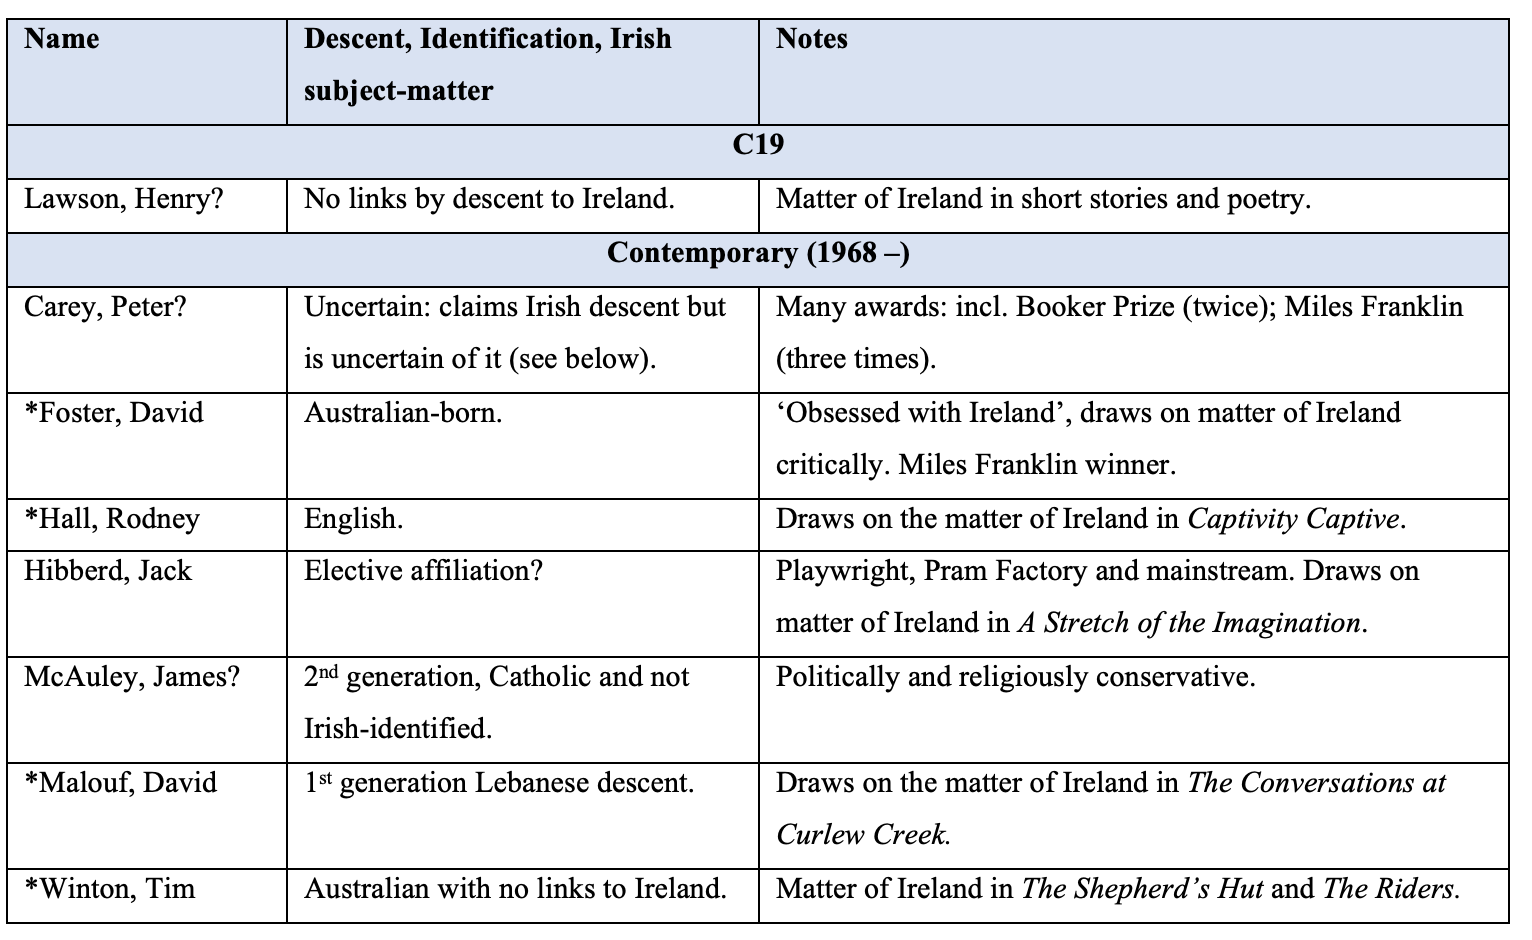 Table 2. A Select List of Significant Writers (with No Family Links to Ireland) Who Deploy the Matter of Ireland (*asterisked entries become relevant in the discussion of Table 6 below)